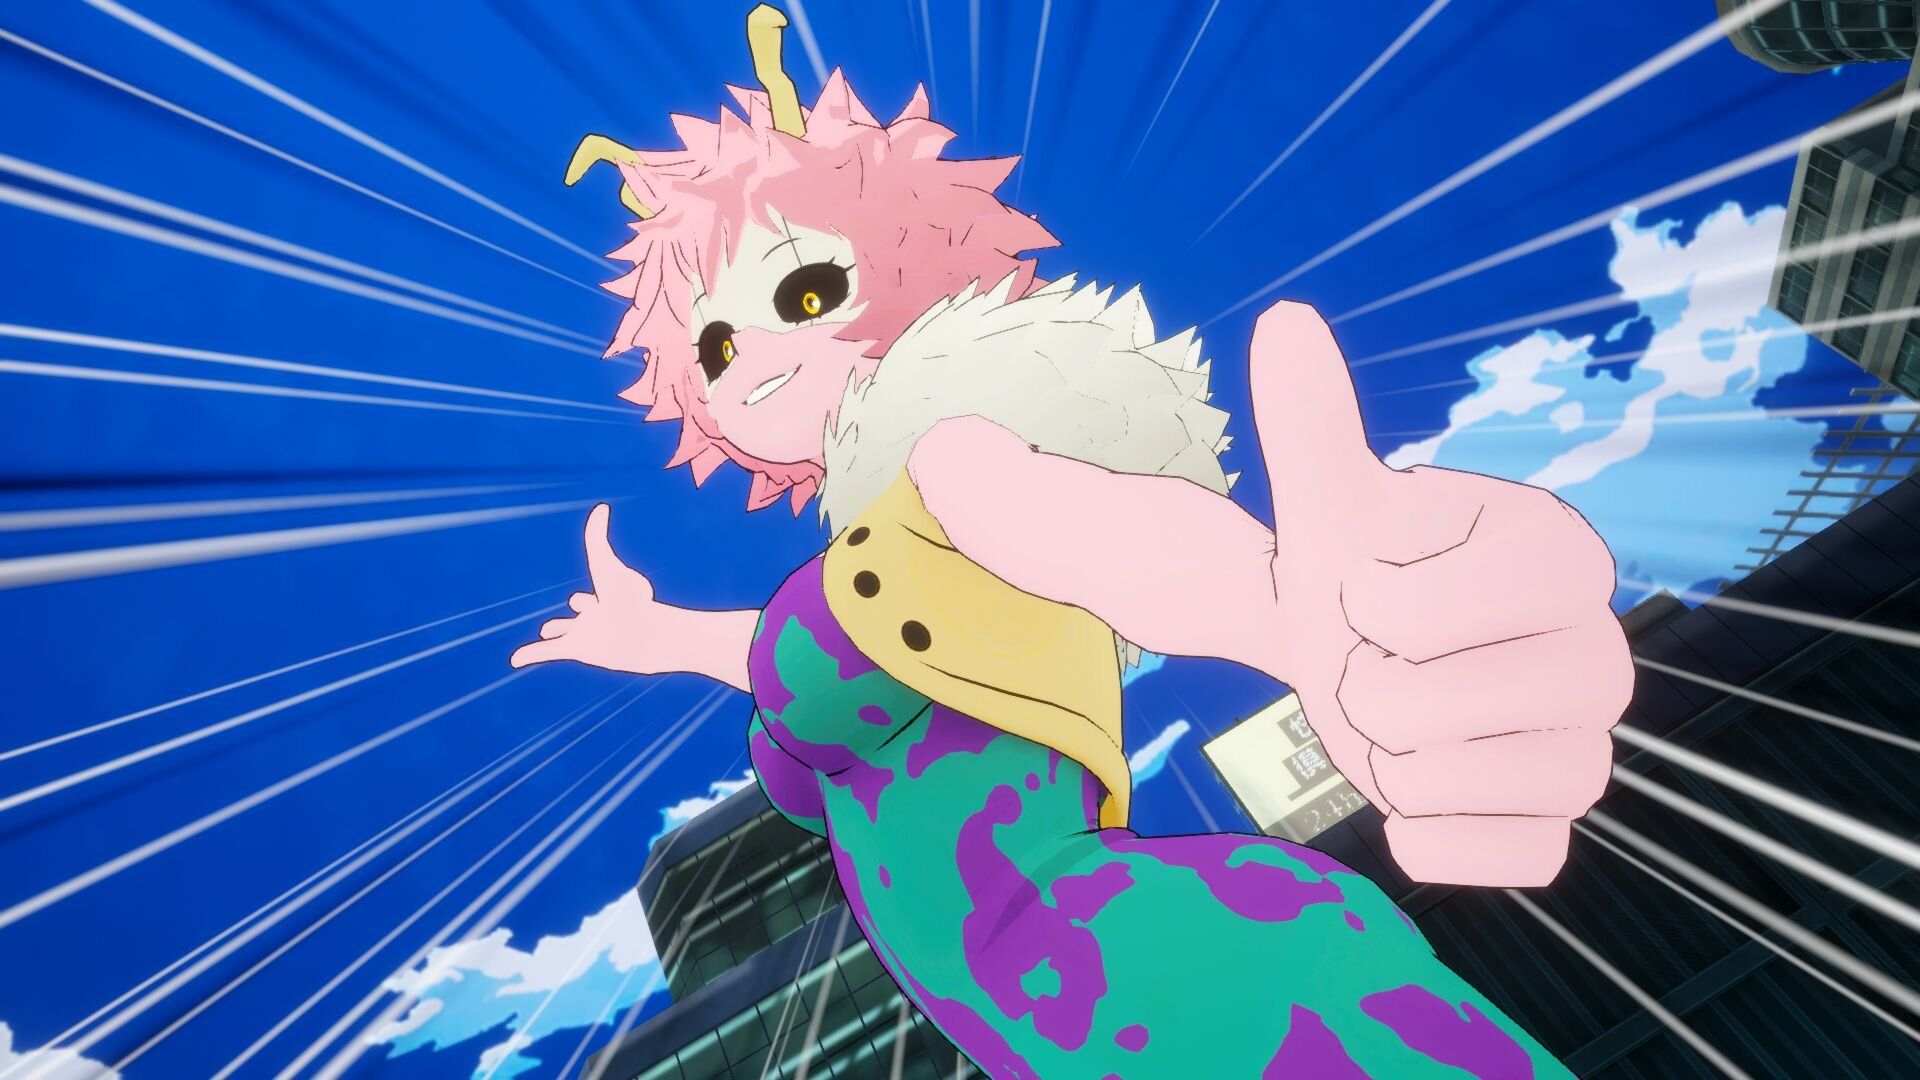 Minoru Mineta and Mina Ashido Have Been Officially Announced for.